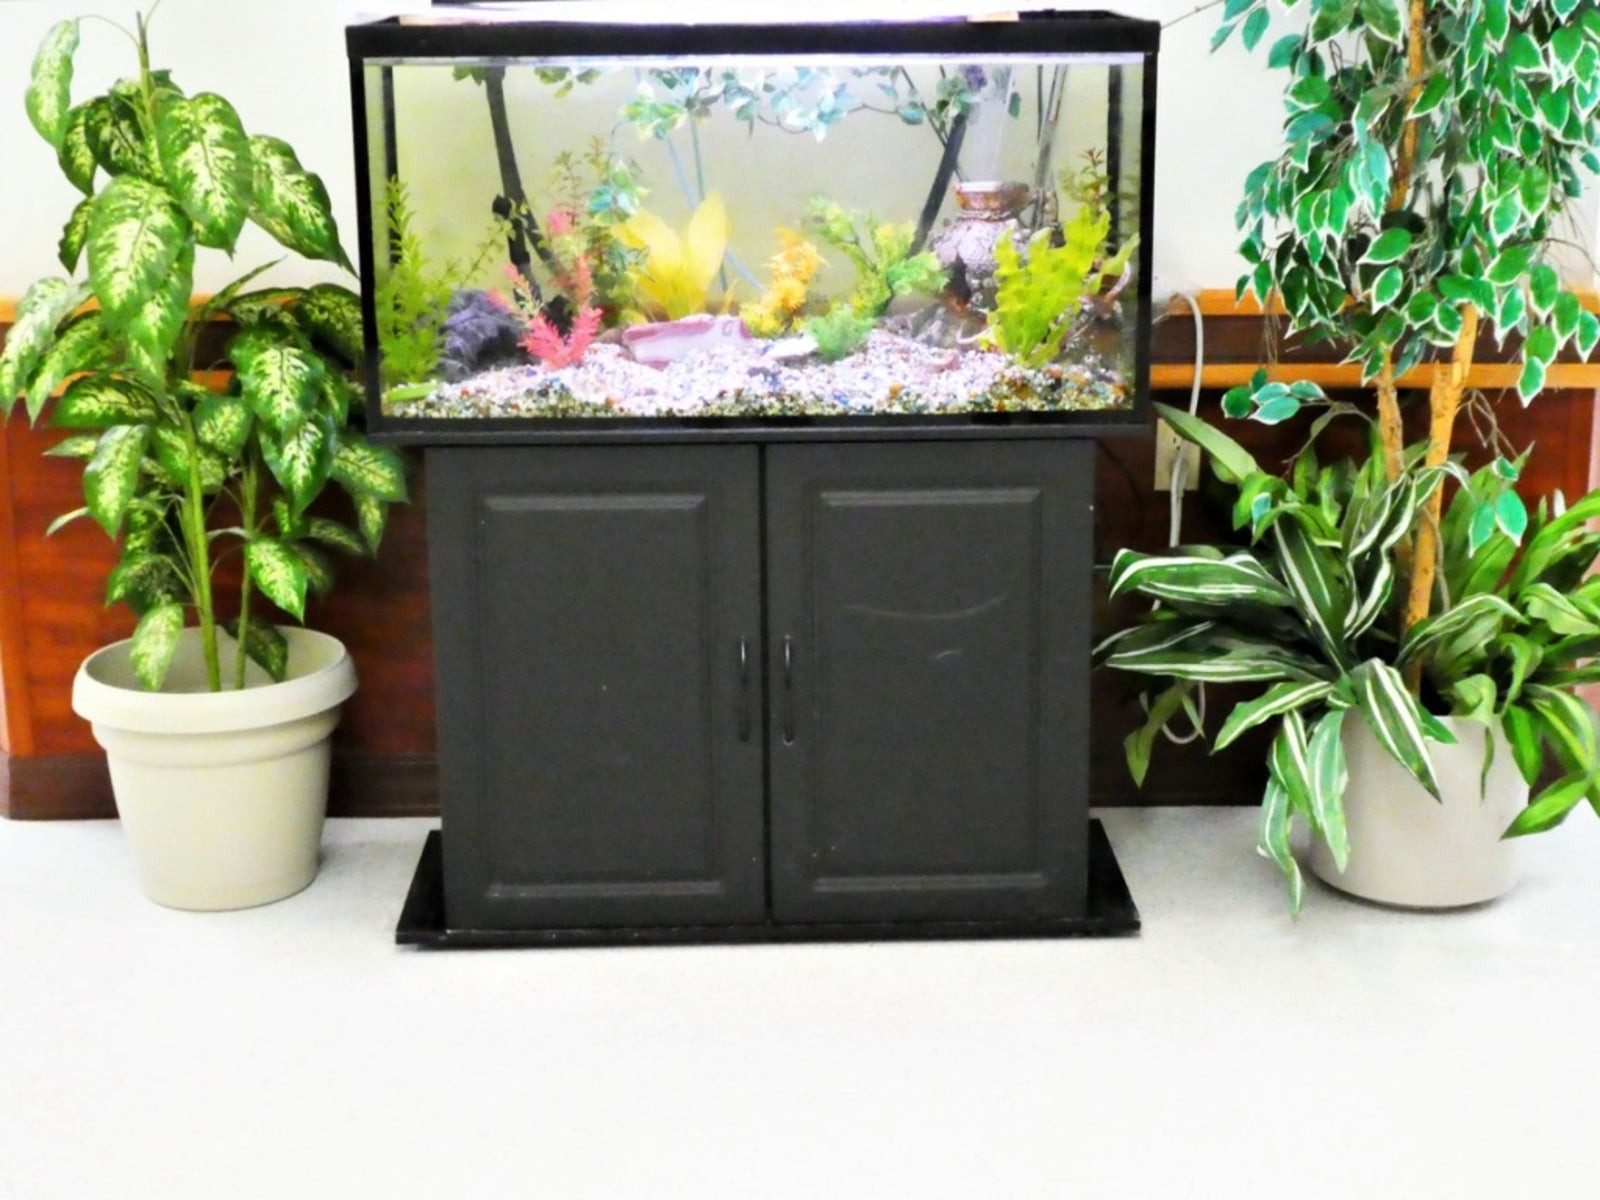 Can You Irrigate Plants With Aquarium Water - Watering Plants With Aquarium  Water